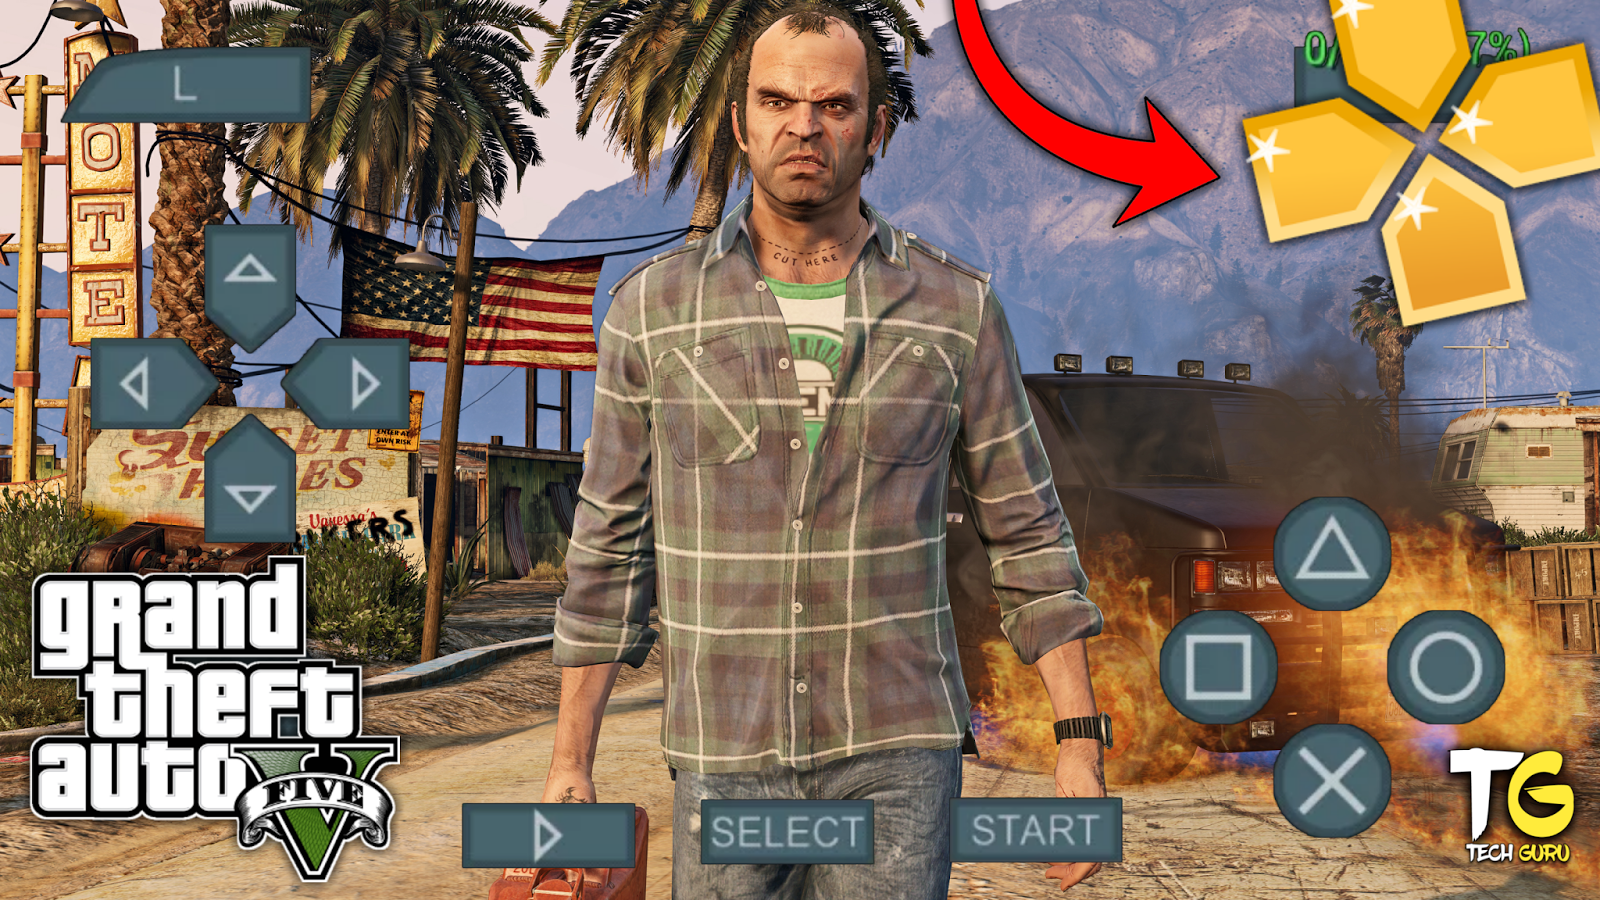 Gta v for ppsspp android final mod pc